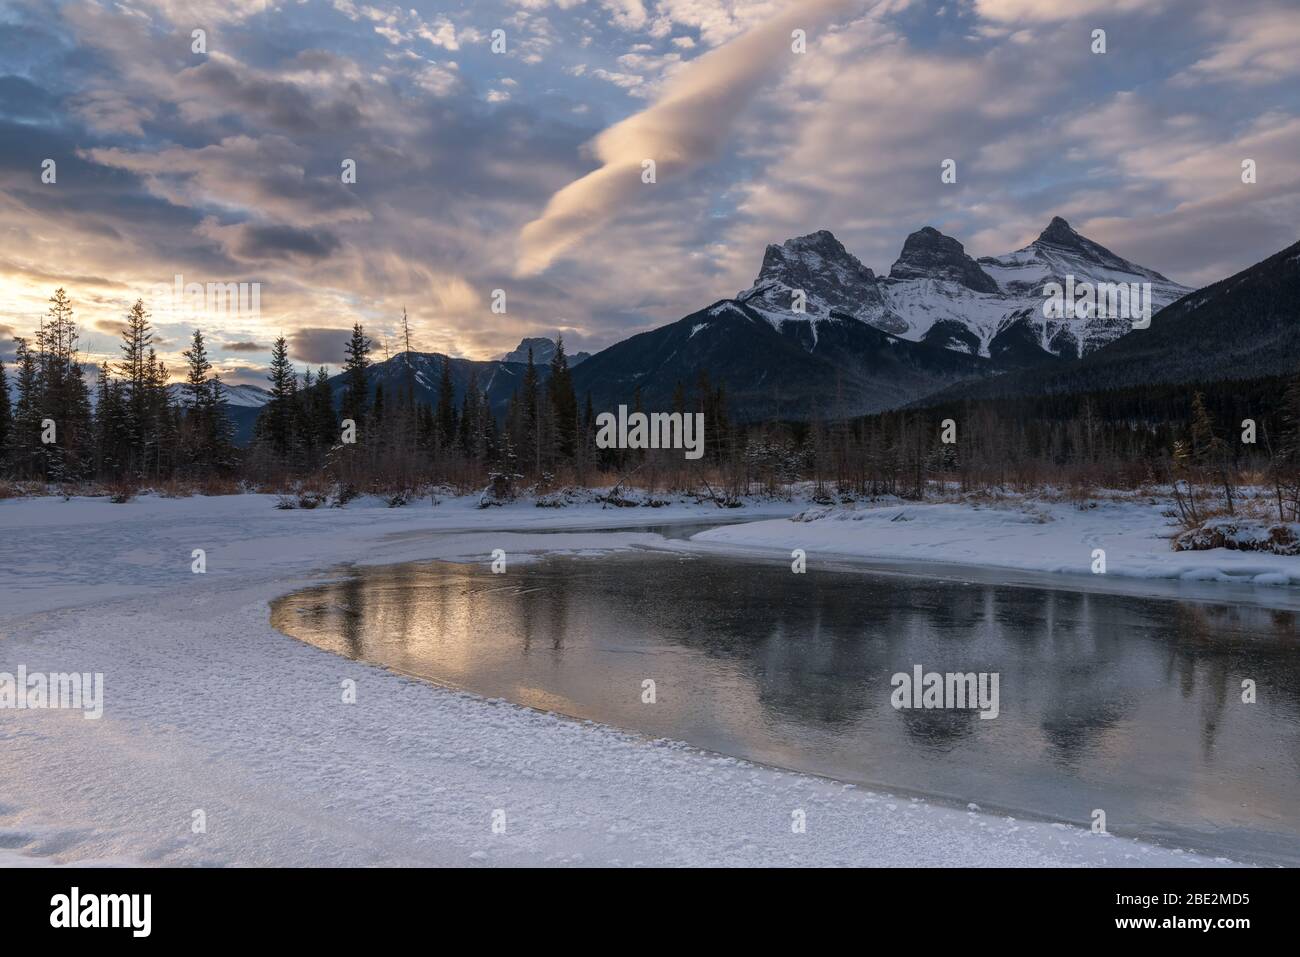 Snow covered Three Sisters peaks reflecting in calm icy water, morning atmosphere, Bow River, Canmore, Banff National Park, Alberta, Canada Stock Photo